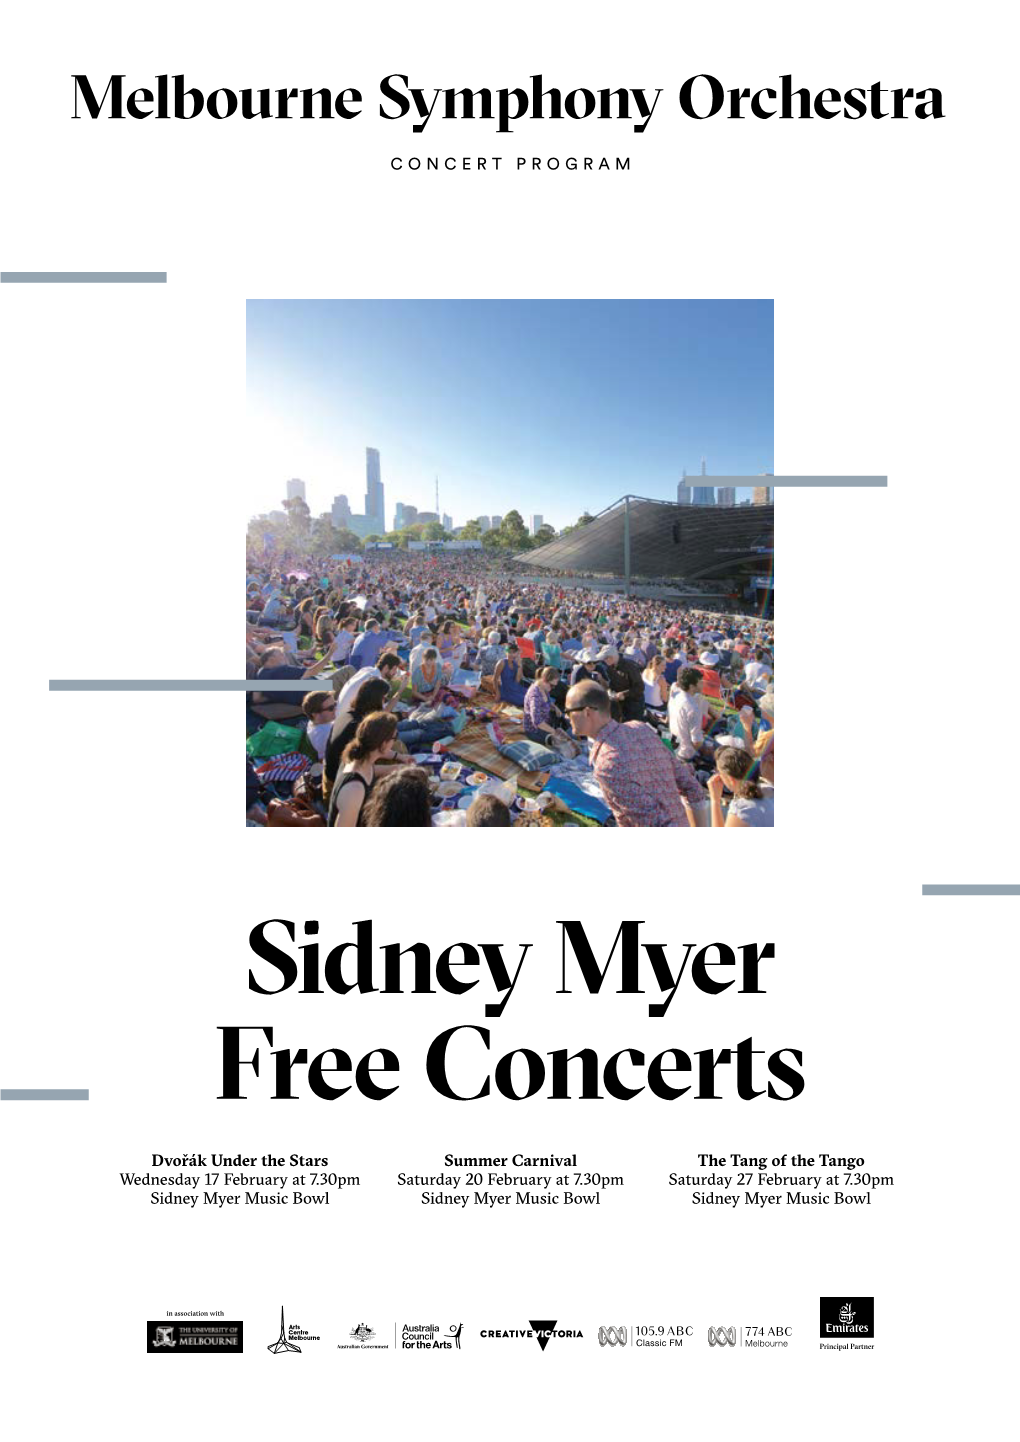 Sidney Myer Free Concerts